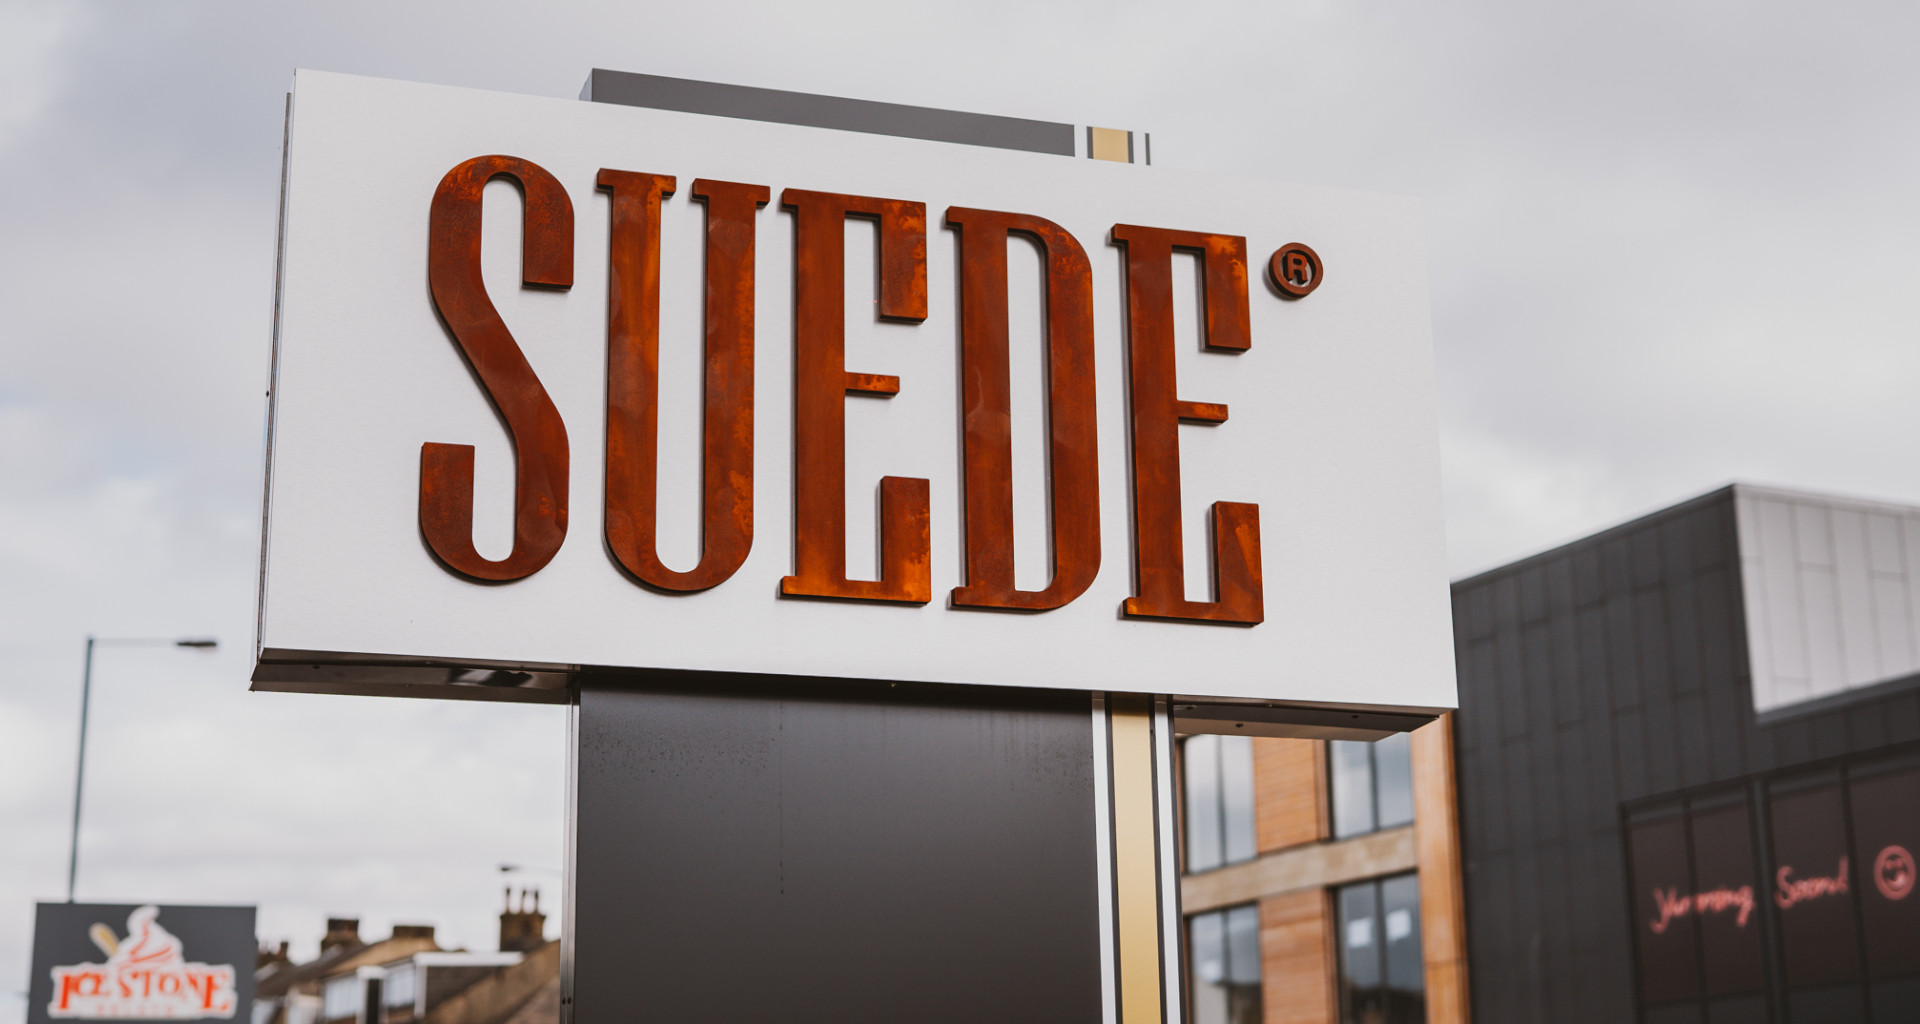 A signboard with the text ‘SUEDE’ in bold, brown letters against a cloudy sky, with other building signs visible in the background.